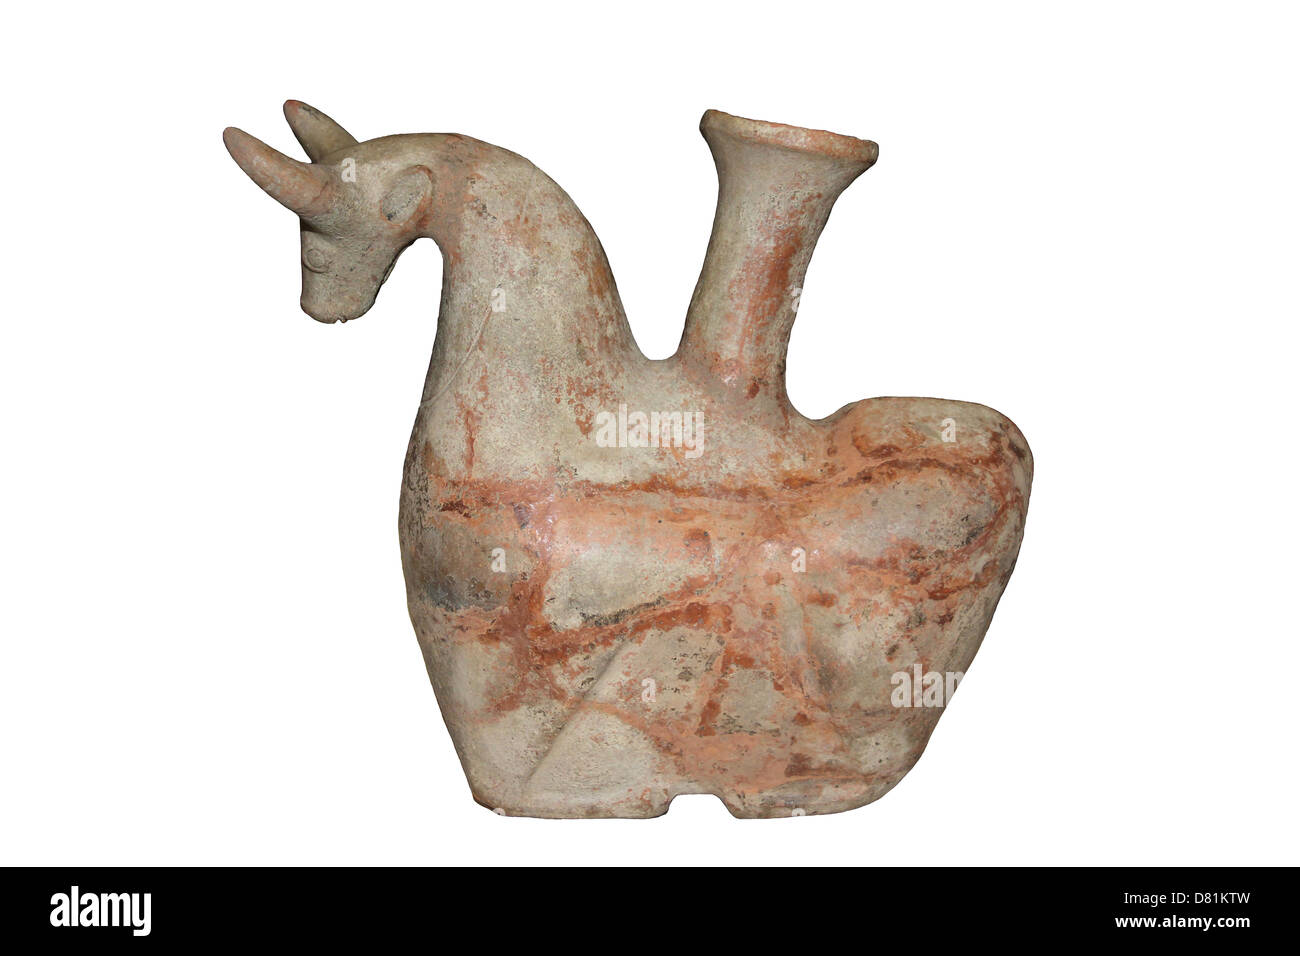 Amlash Culture Jar In The Shape Of A Bull Marlik Region, Iran Early Iron Age About 1000BC Stock Photo